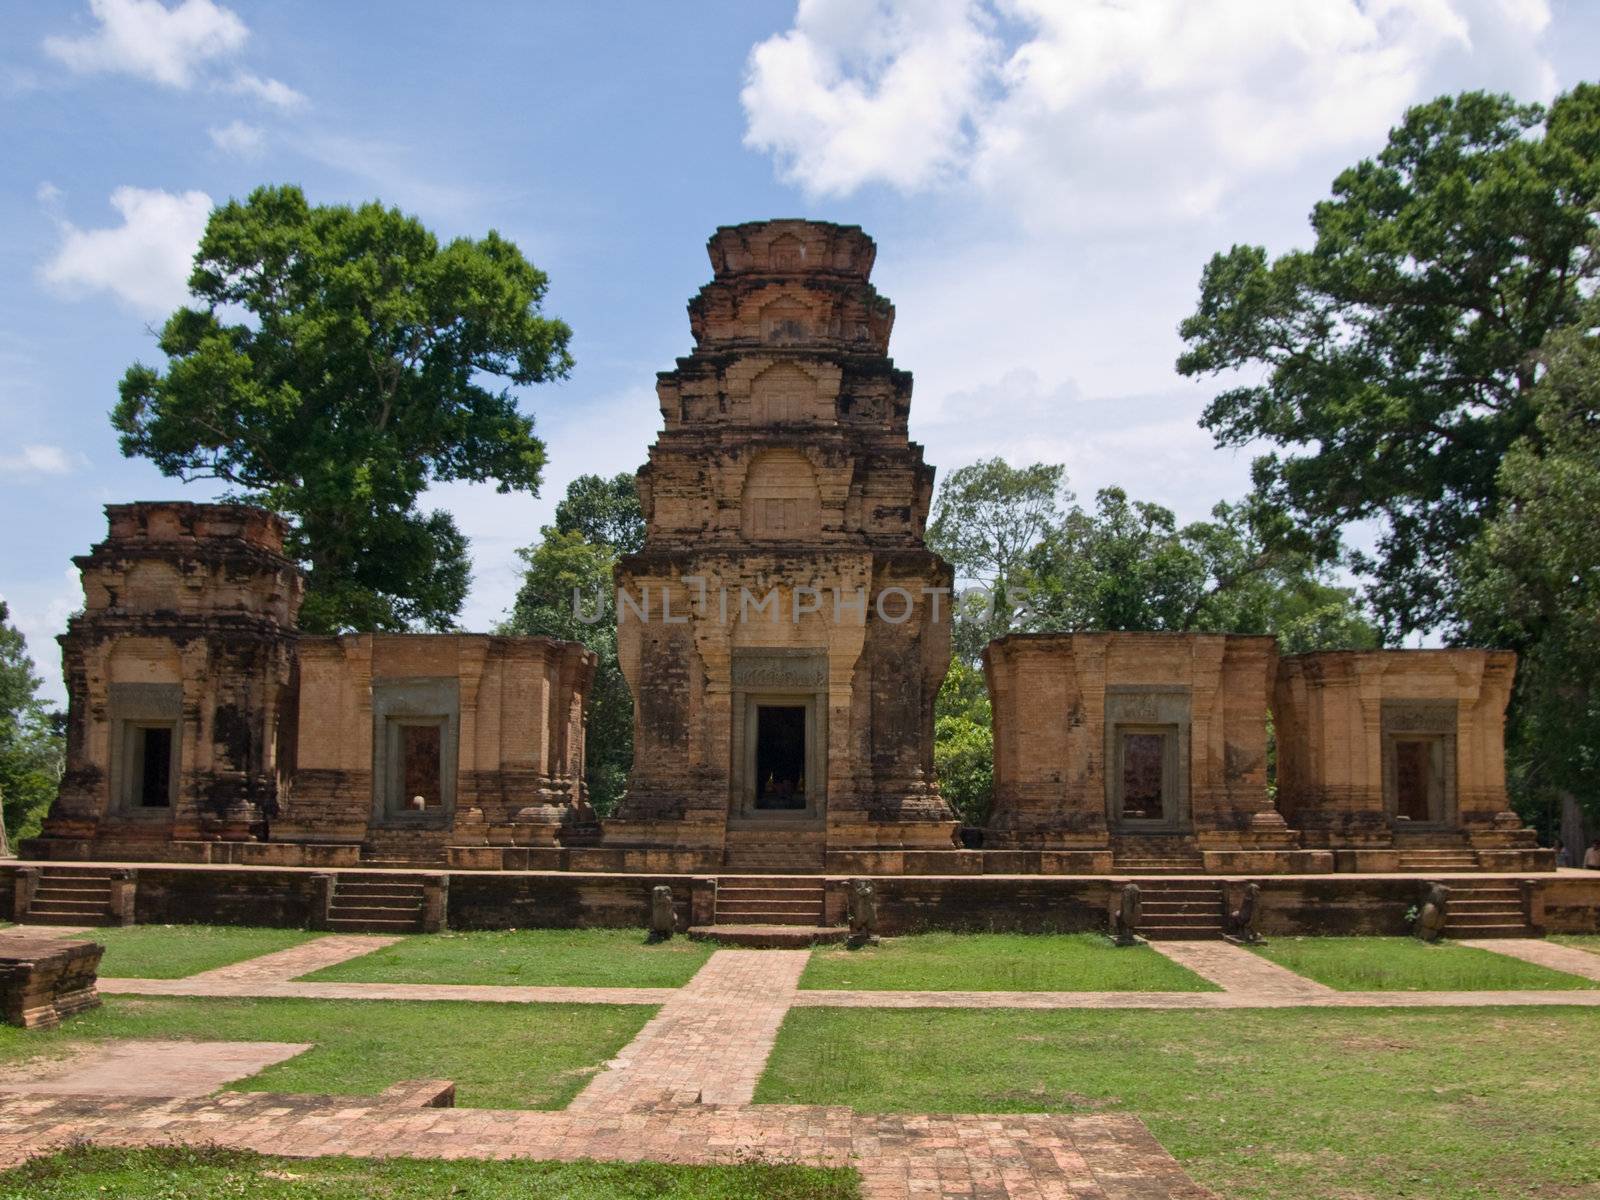 one of the eldest cambodian temples - 10-12 centuries